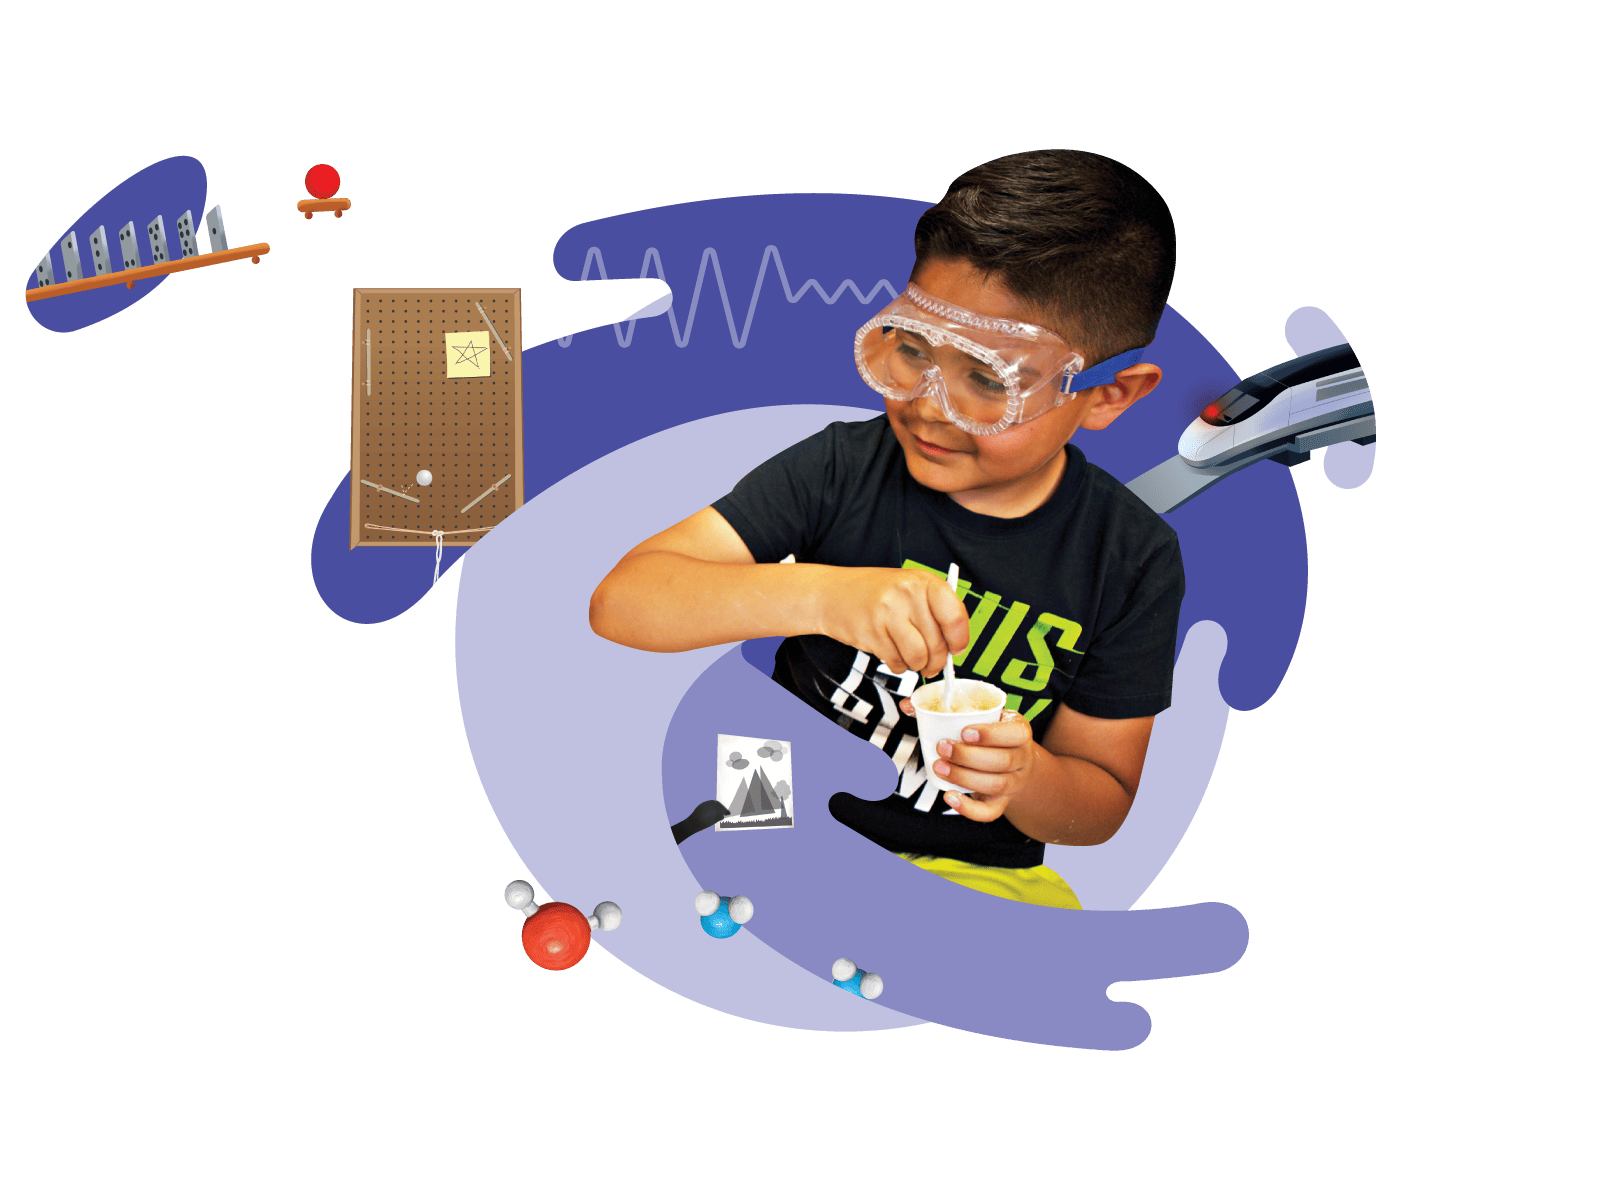 A young boy in safety goggles conducting a science experiment with a beaker, surrounded by illustrated science and math symbols.